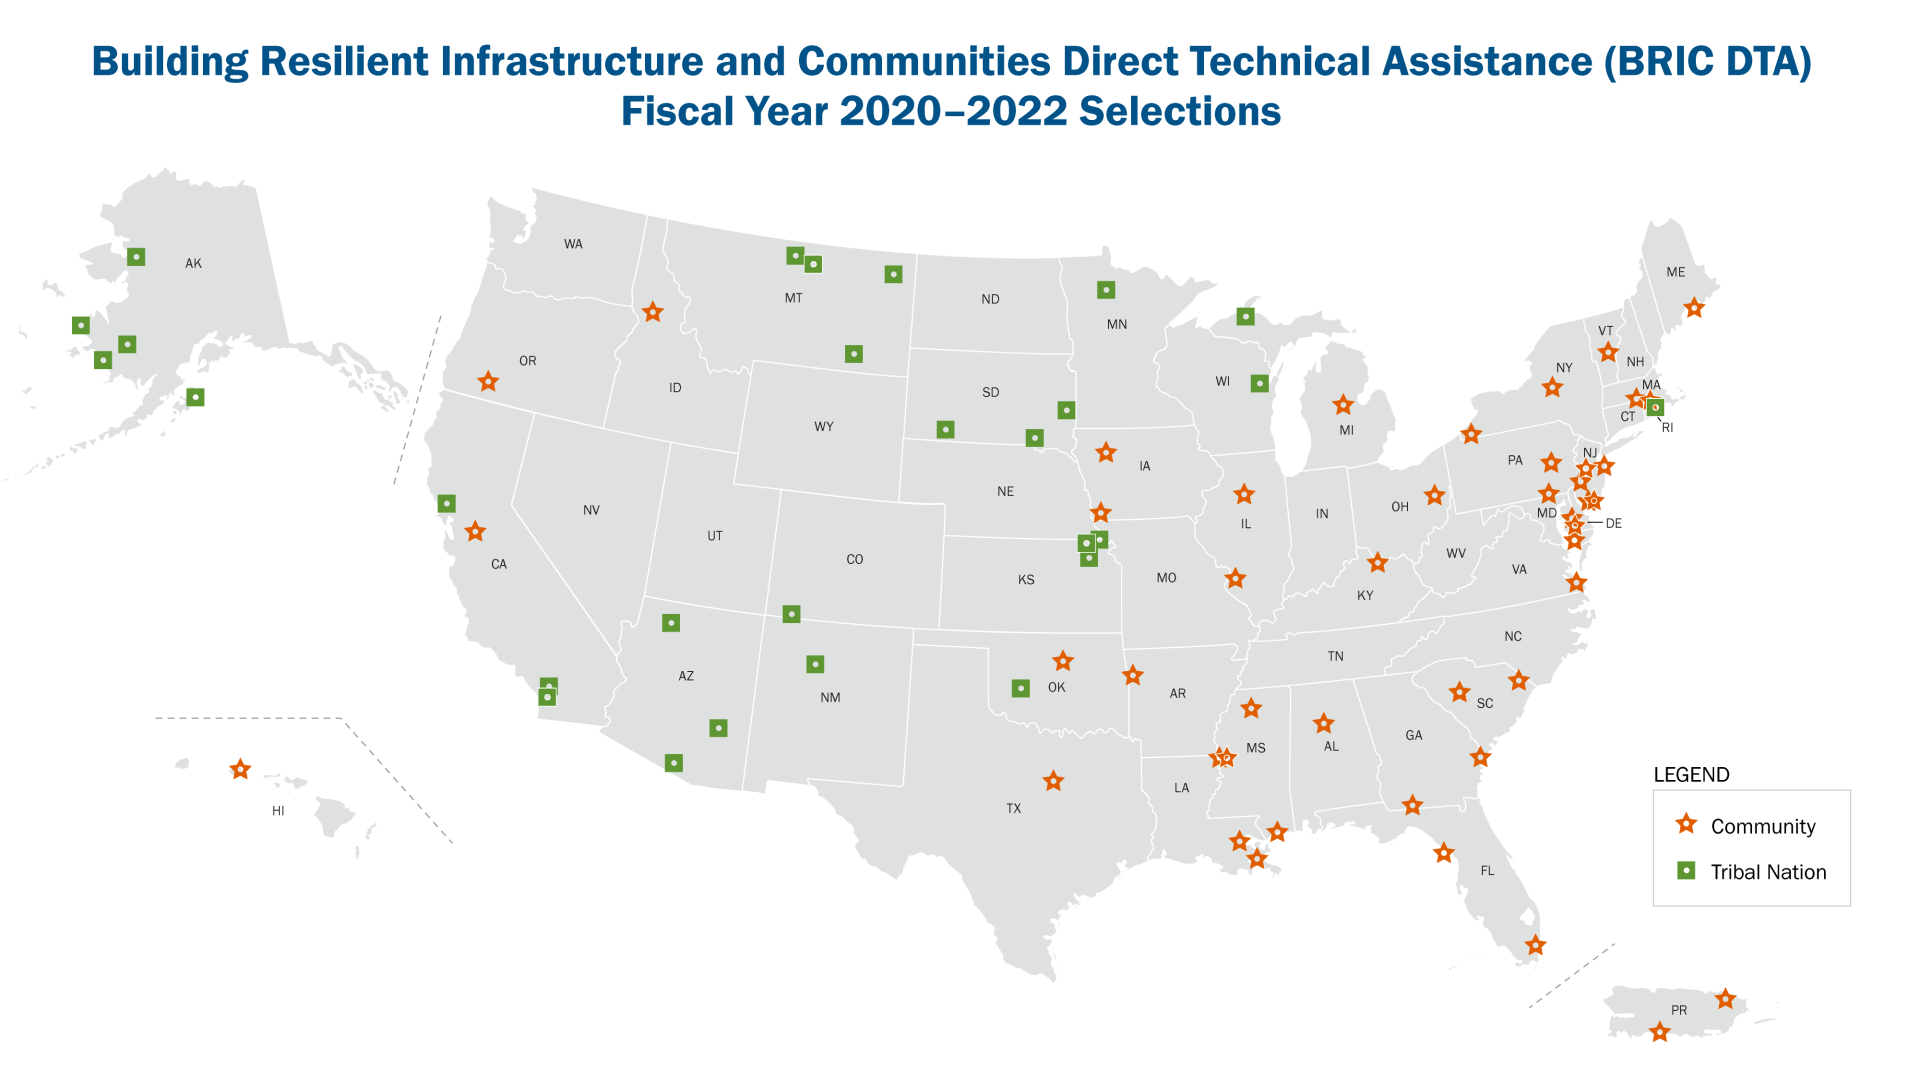 This map shows the communities and tribal nations that received DTA funding in fiscal years 2020-2022.